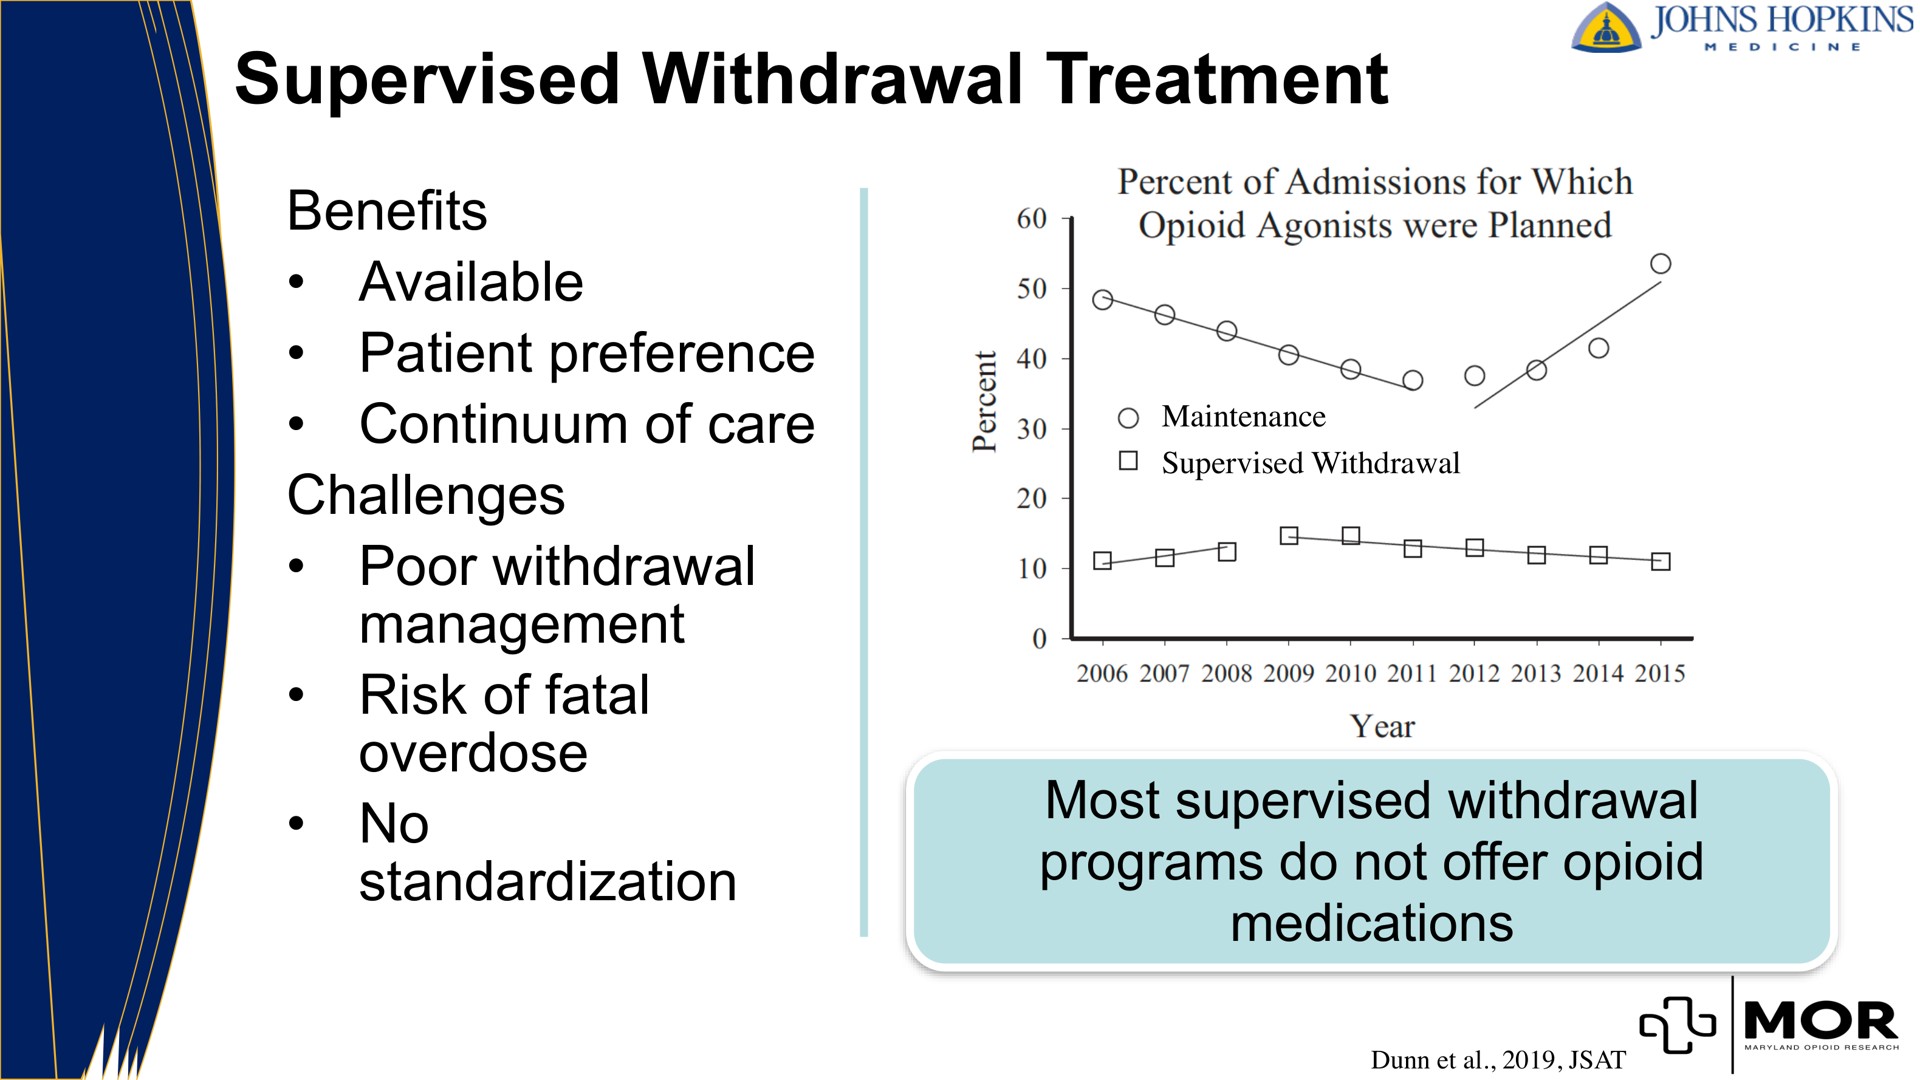 supervised withdrawal treatment benefits available patient preference agonists were planned continuum of care poor management overdose no standardization maintenance oes a car most programs do not offer medications mor | MindMed